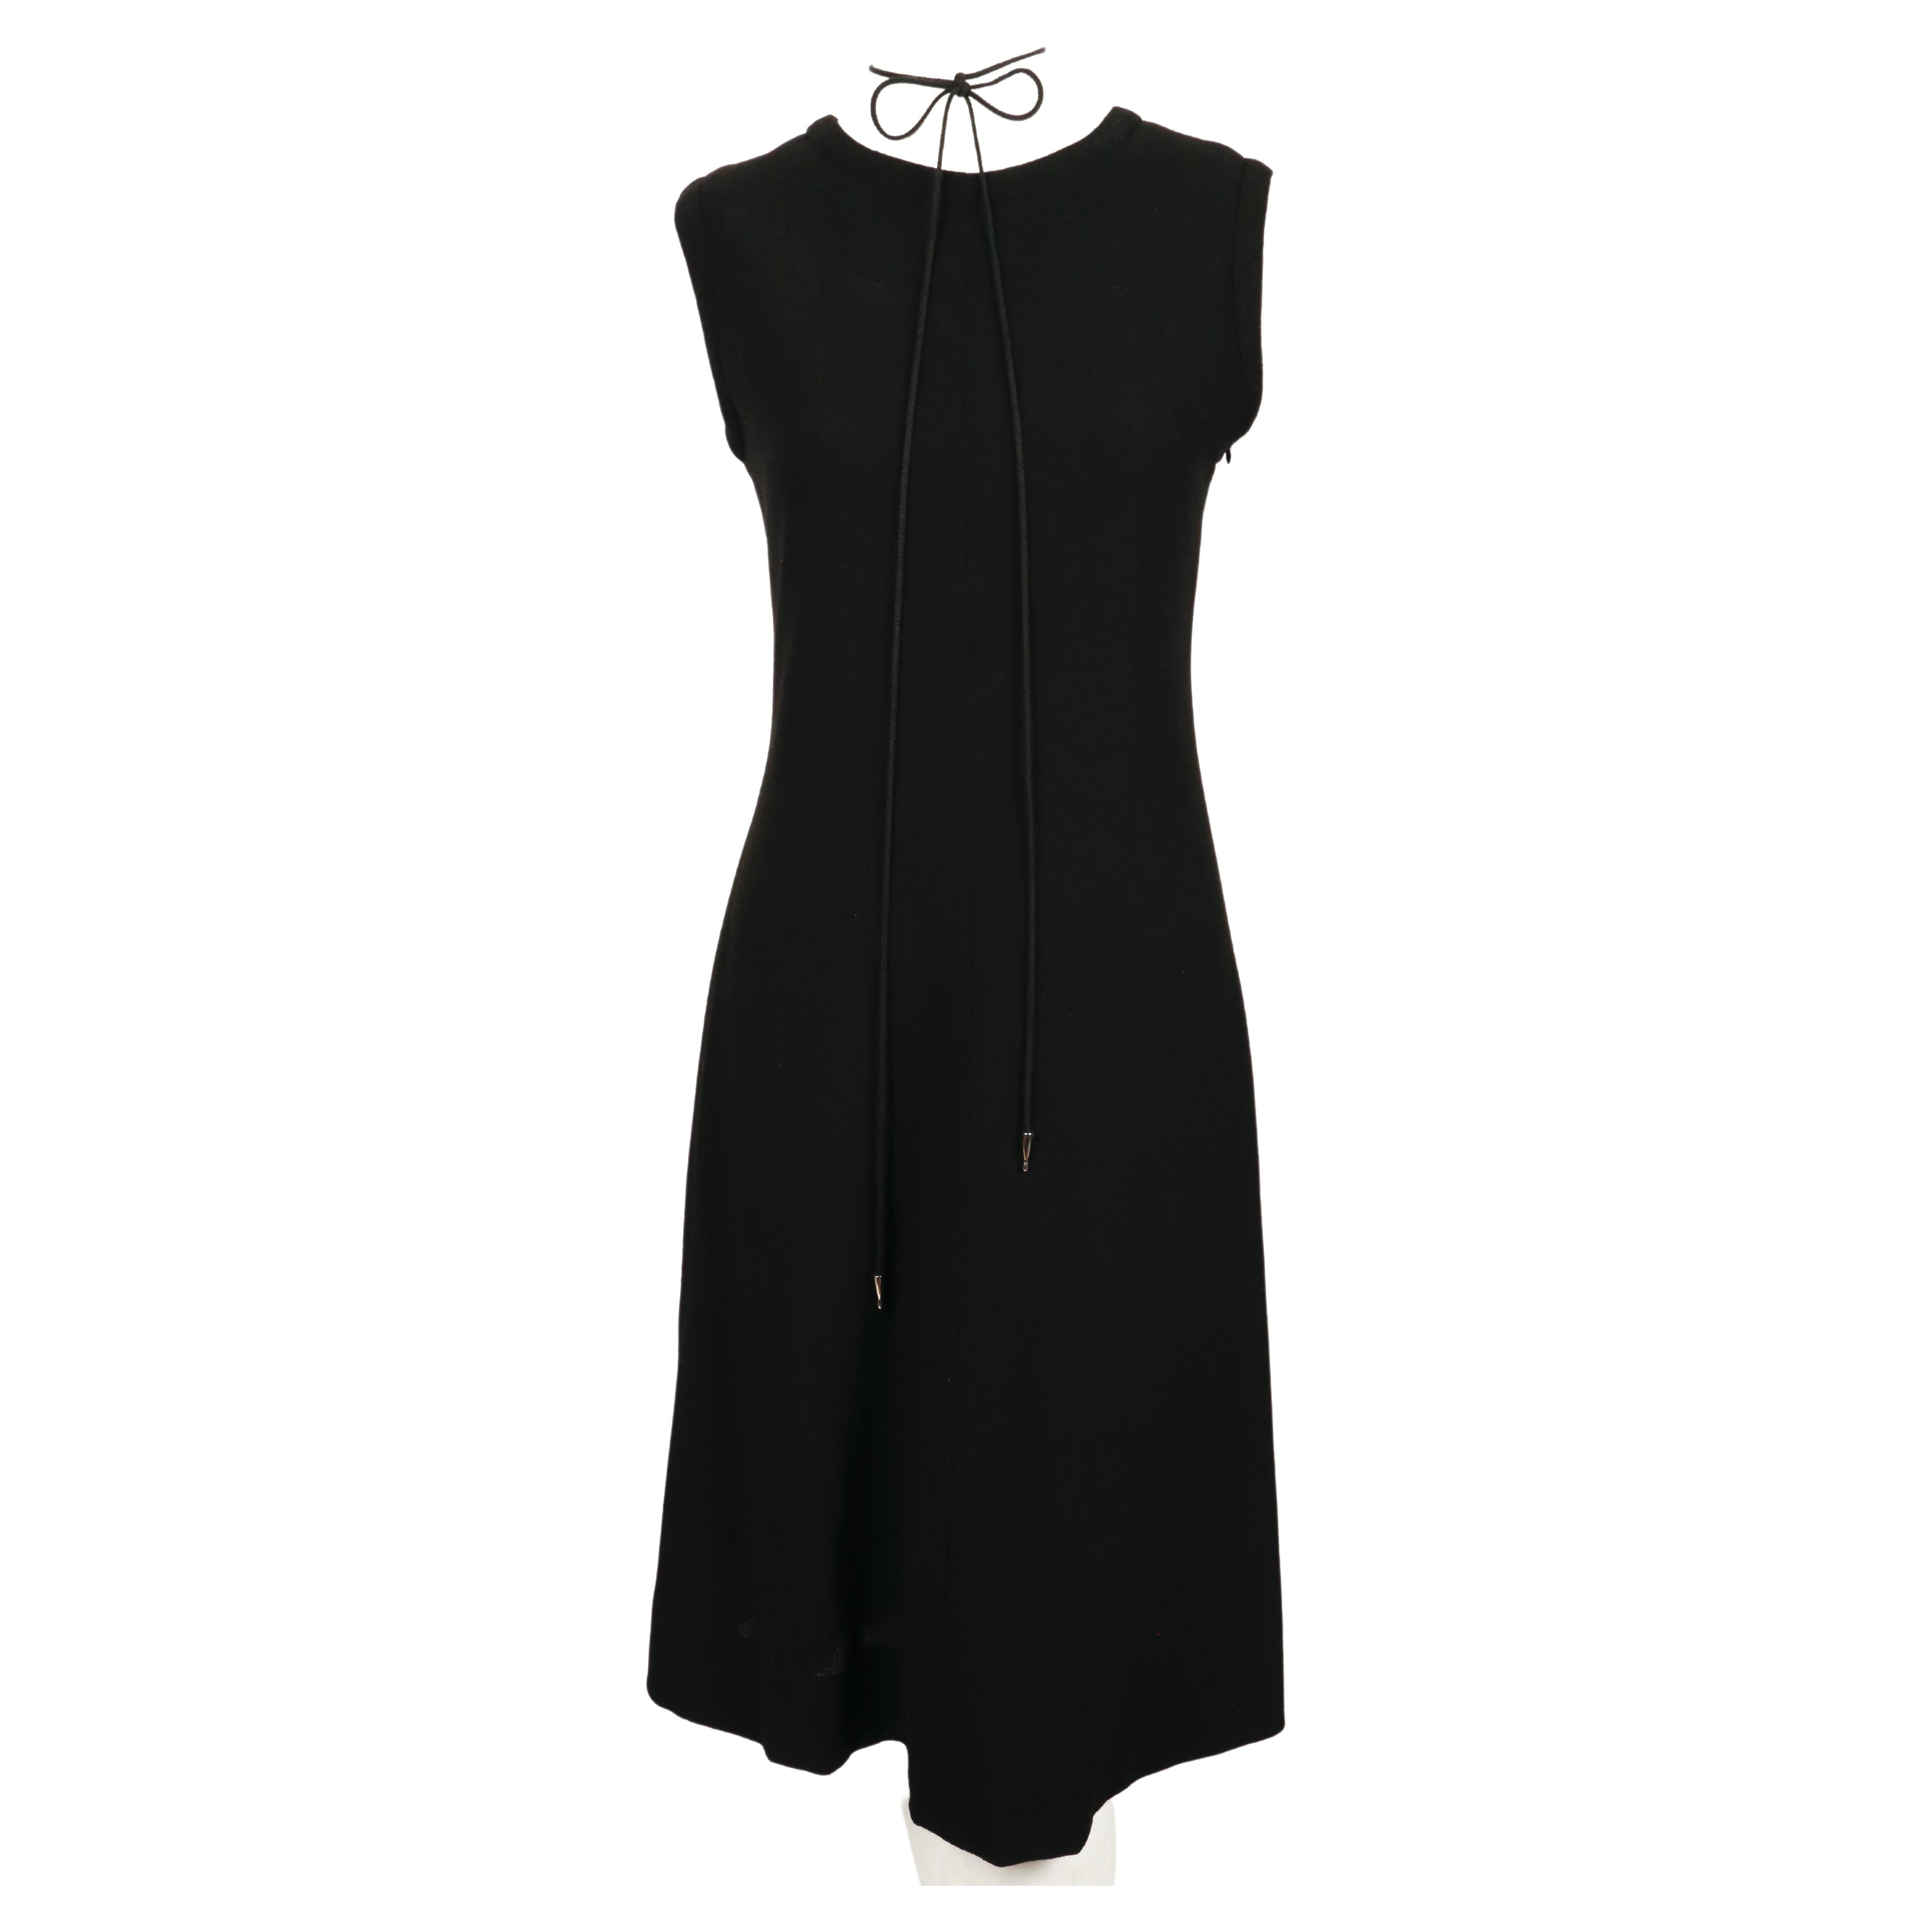 Jet-black, wool dress with lace up back designed by Yves Saint Laurent dating to the early 1990's. Dress has a slight A-line shape. Ties have shiny silver metal ends and can be worn an number of ways. Also, the dress can be worn with front or back